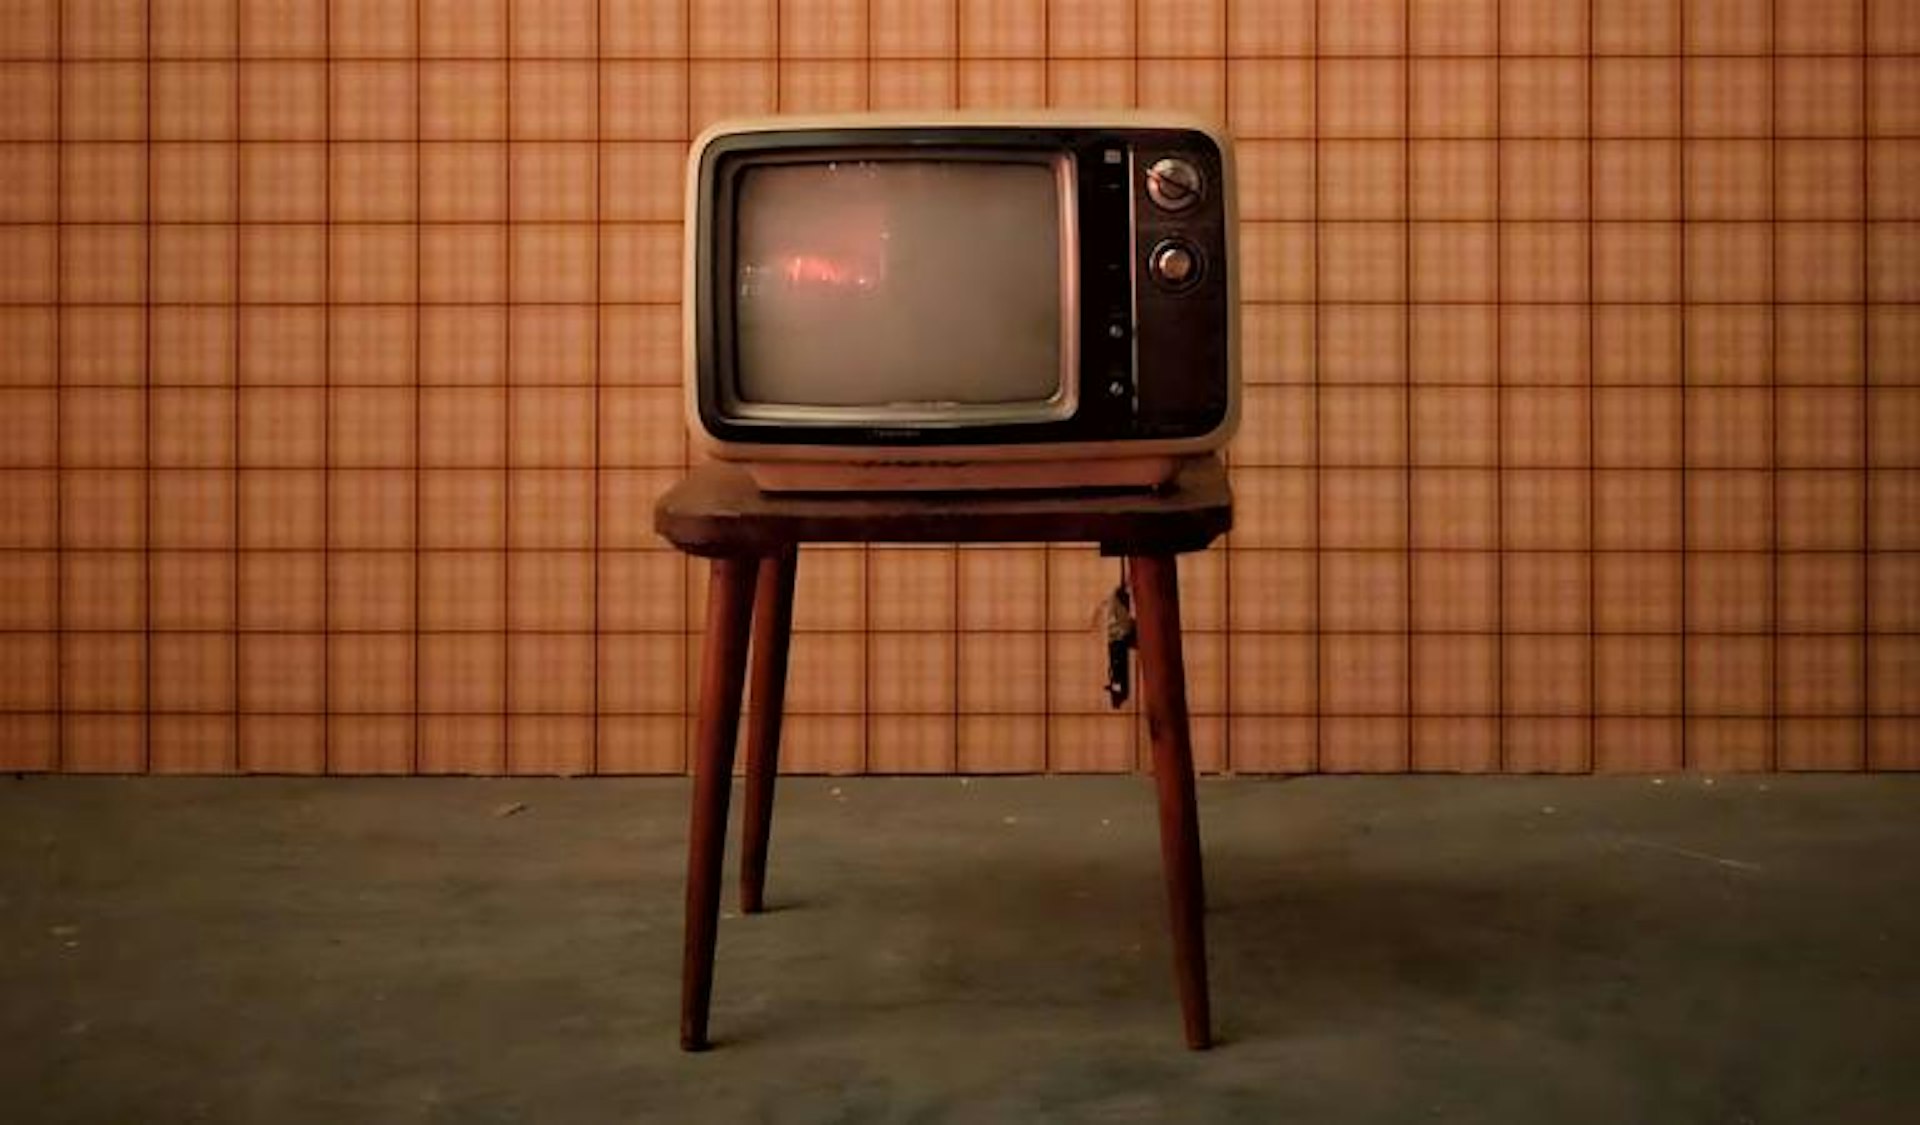 Picture of an old-style TV set.